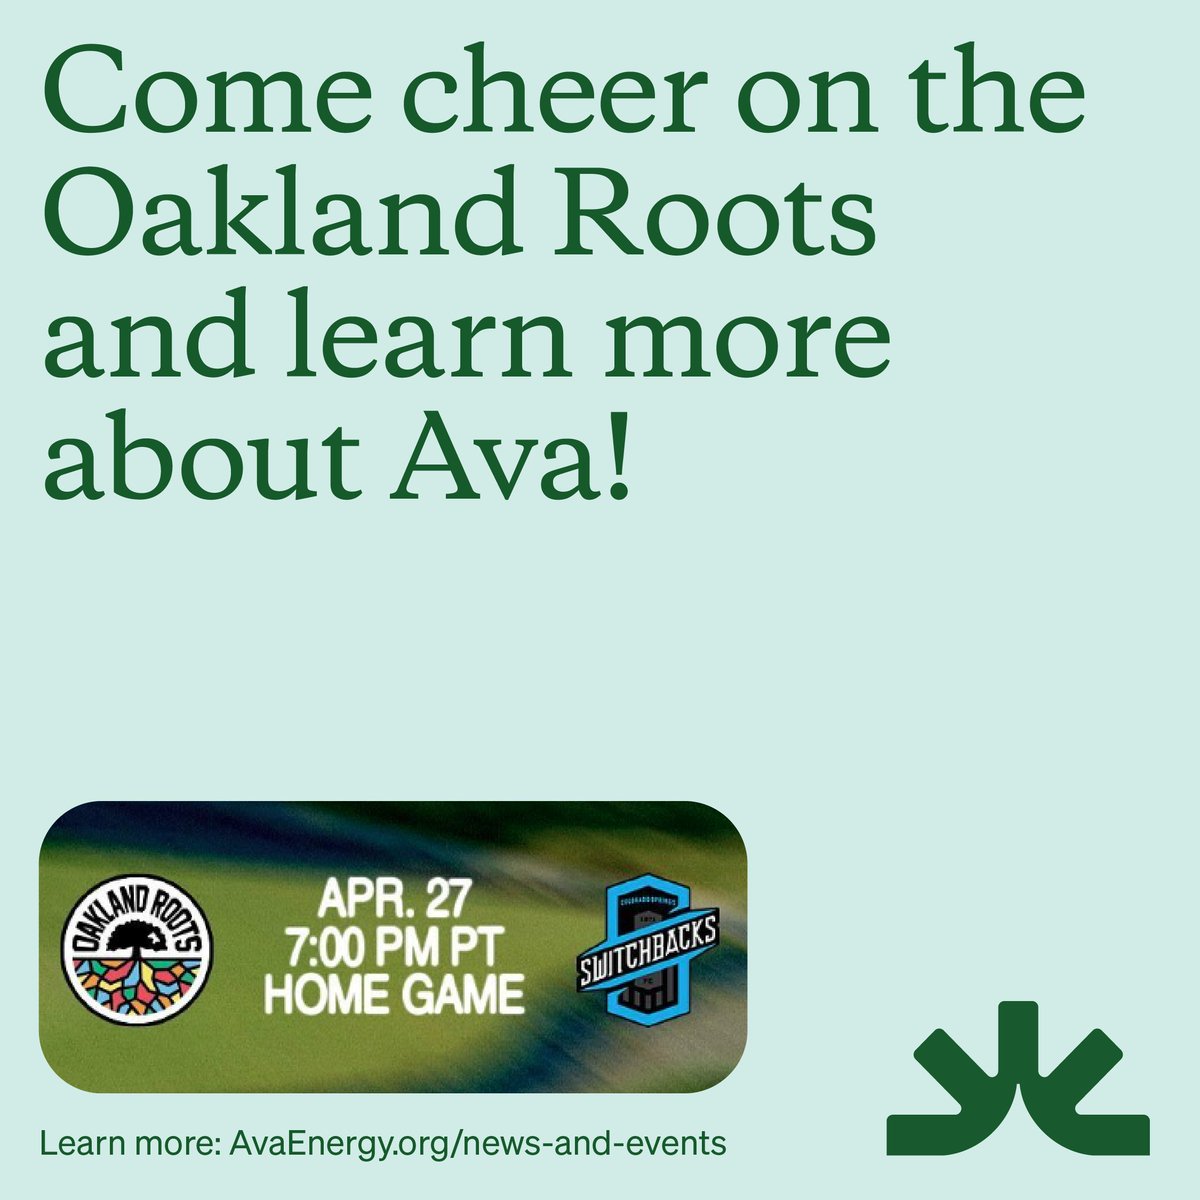 Stop by our booth at the @oaklandrootssc game tomorrow, Saturday April 27 at 7:00 PM, to learn about Ava and get some great swag!